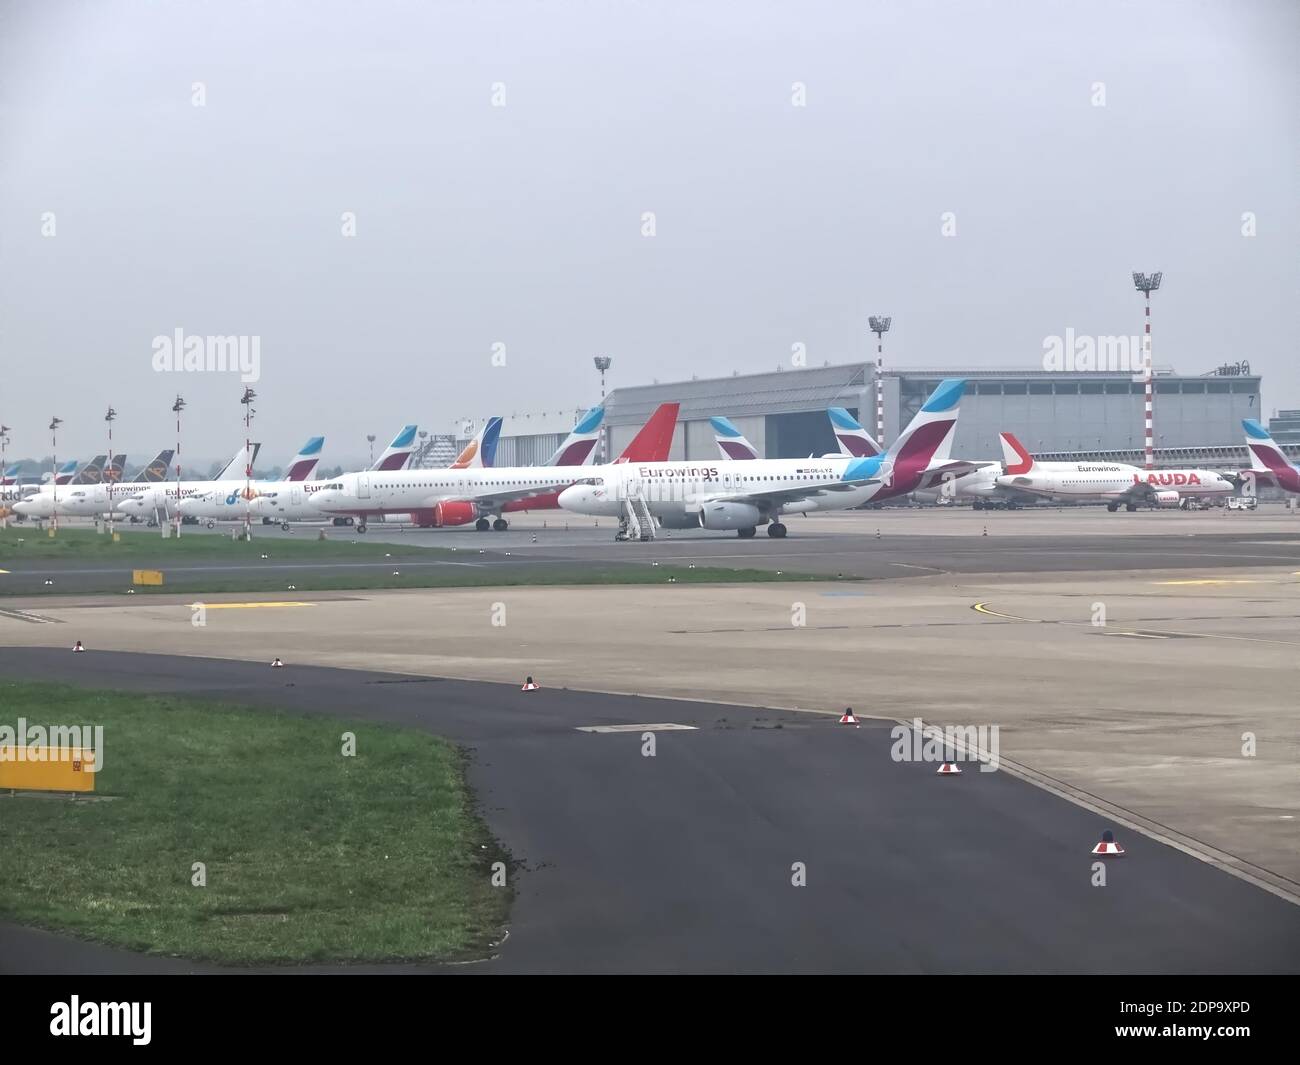 Row of Eurowings airplanes at Duesseldorf airport in park position during Covid-19 pandemic Stock Photo